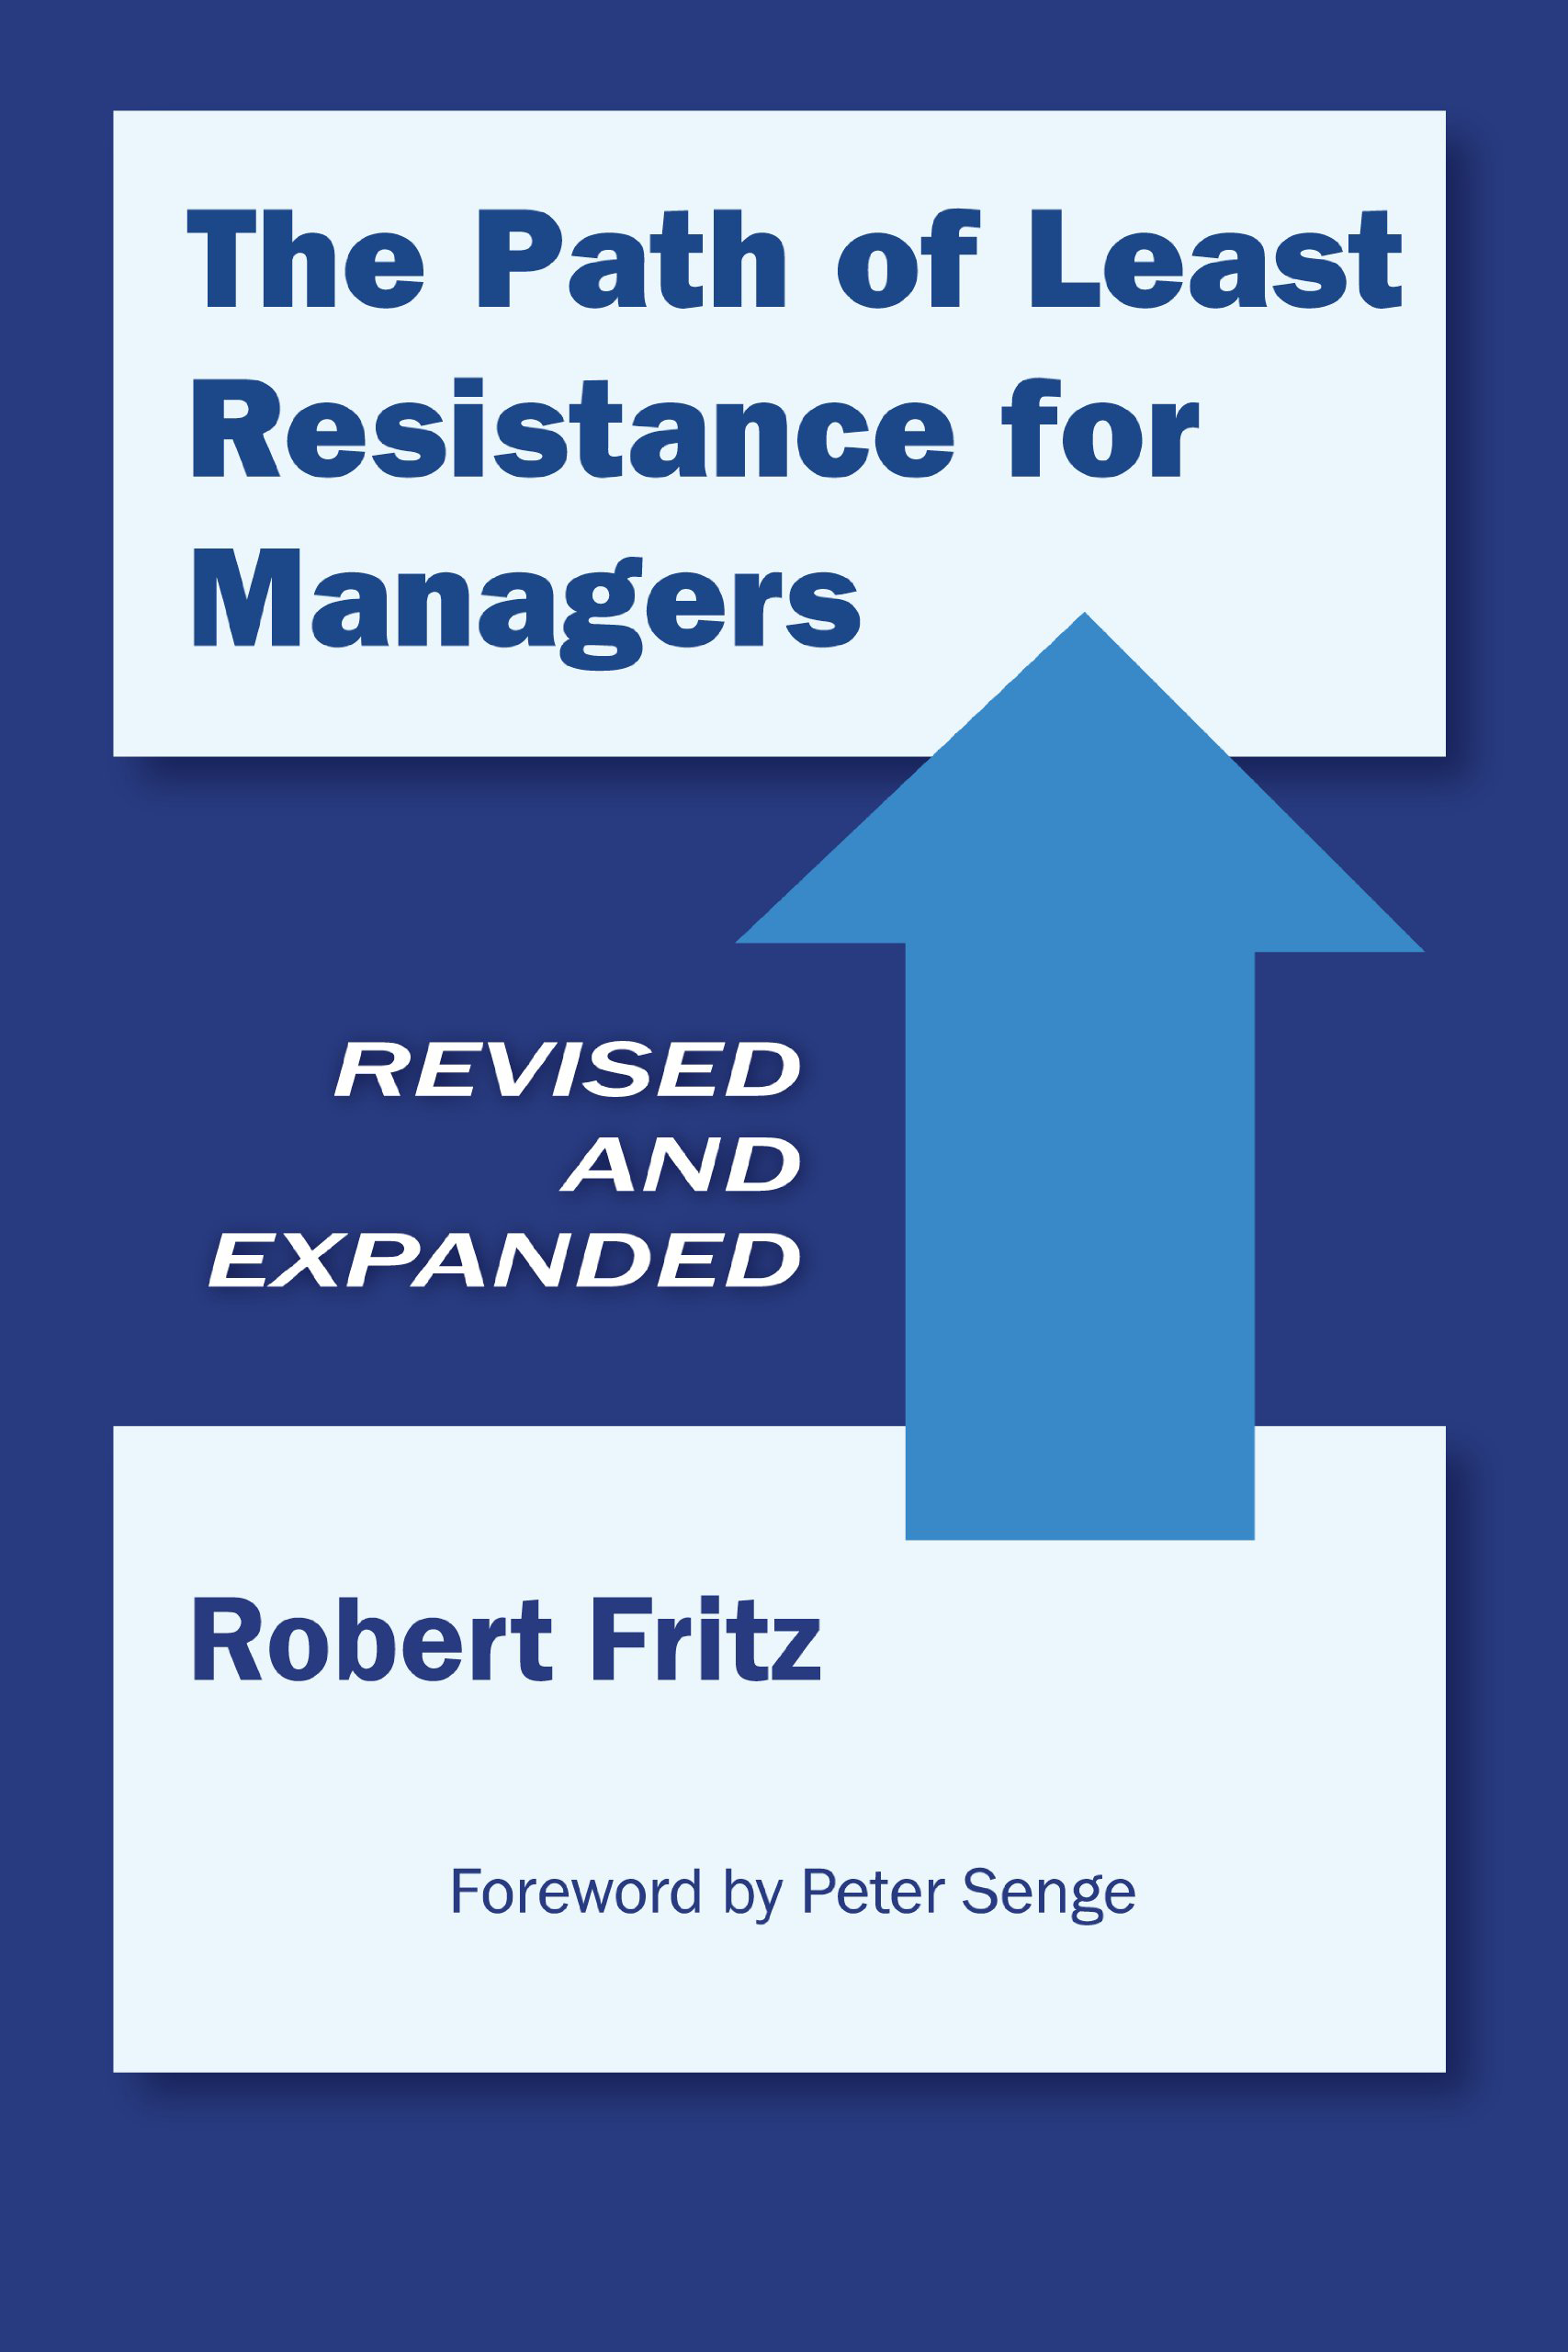 the path of least Resistance for managers